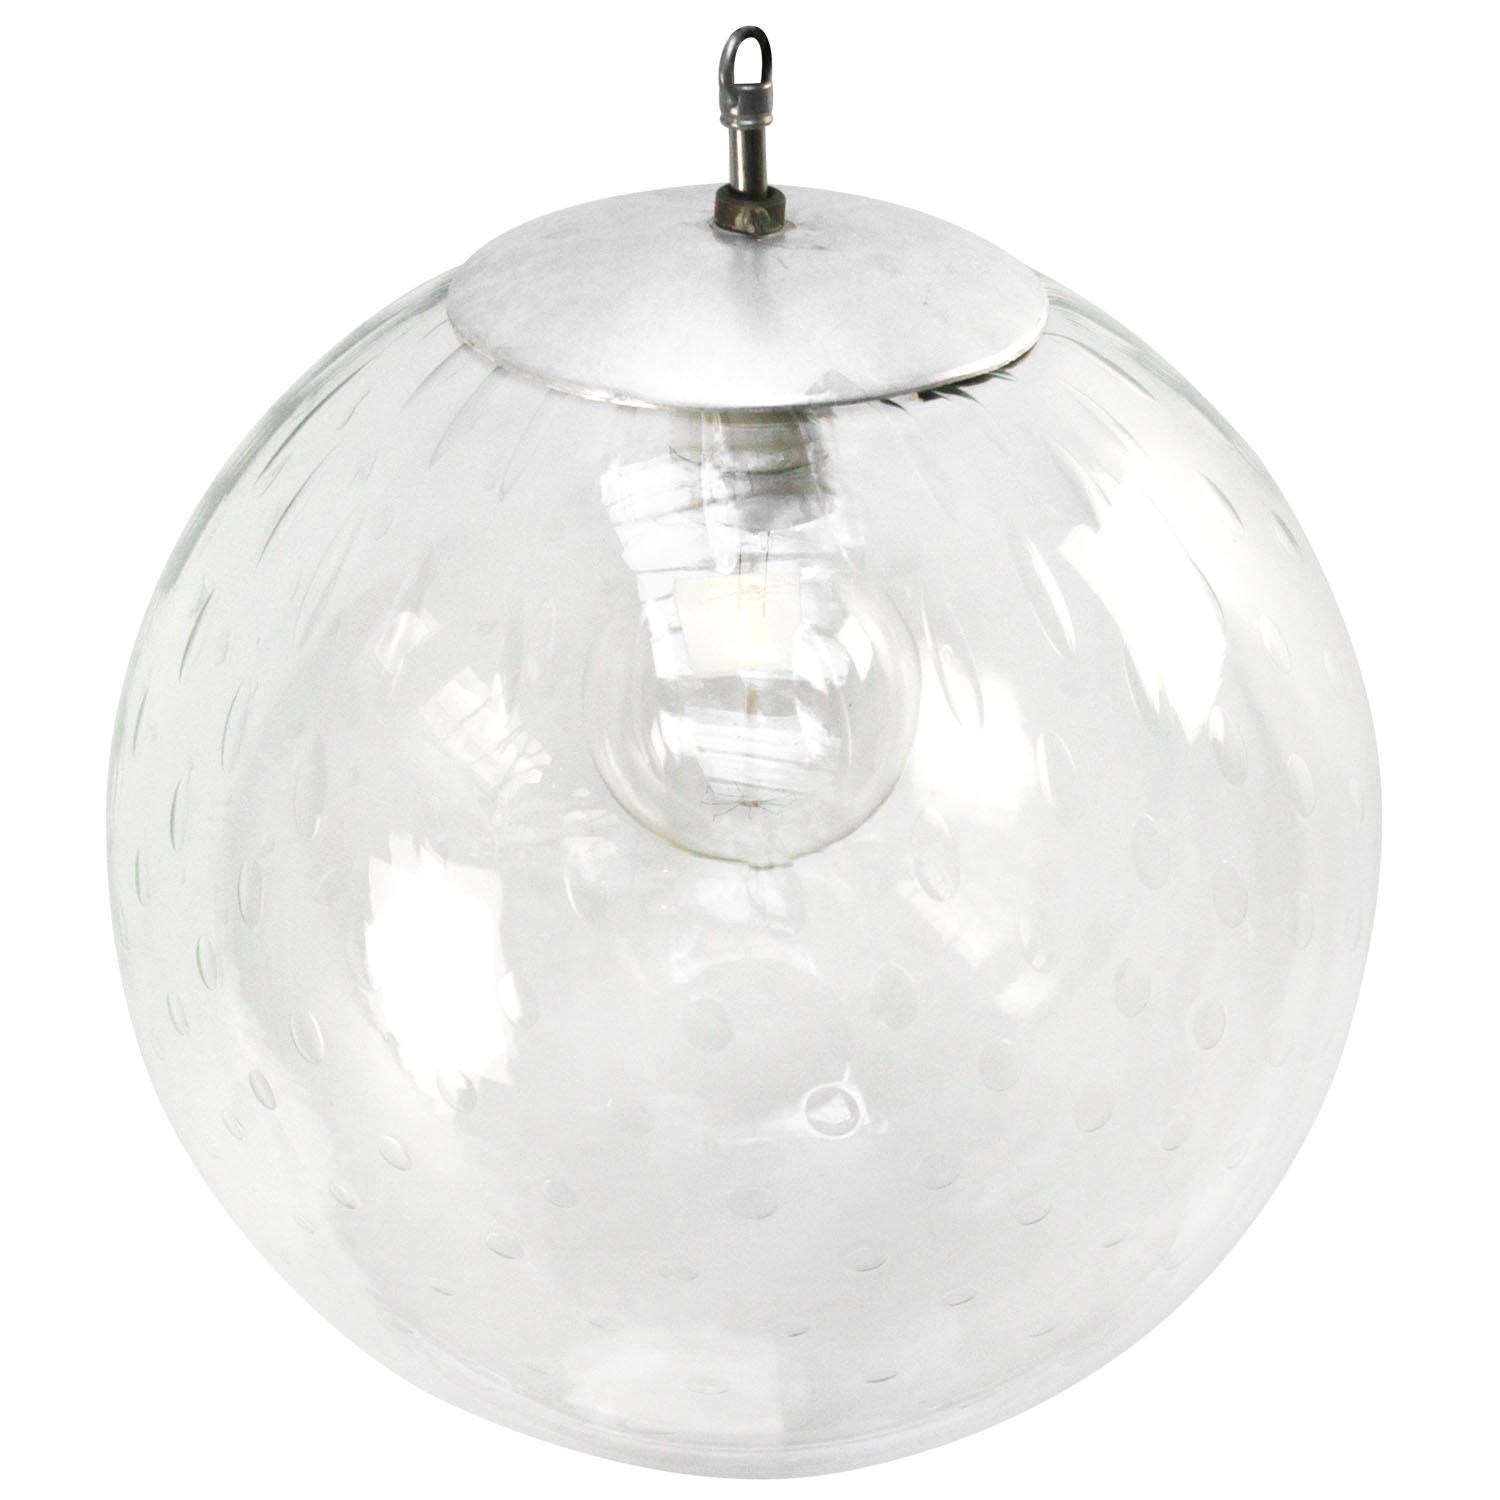 Original vintage air bubble glass pendant by RAAK.
2 Meter black cotton flex.
Aluminium top.

Weight: 3.20 kg / 7.1 lb

Priced per individual item. All lamps have been made suitable by international standards for incandescent light bulbs,